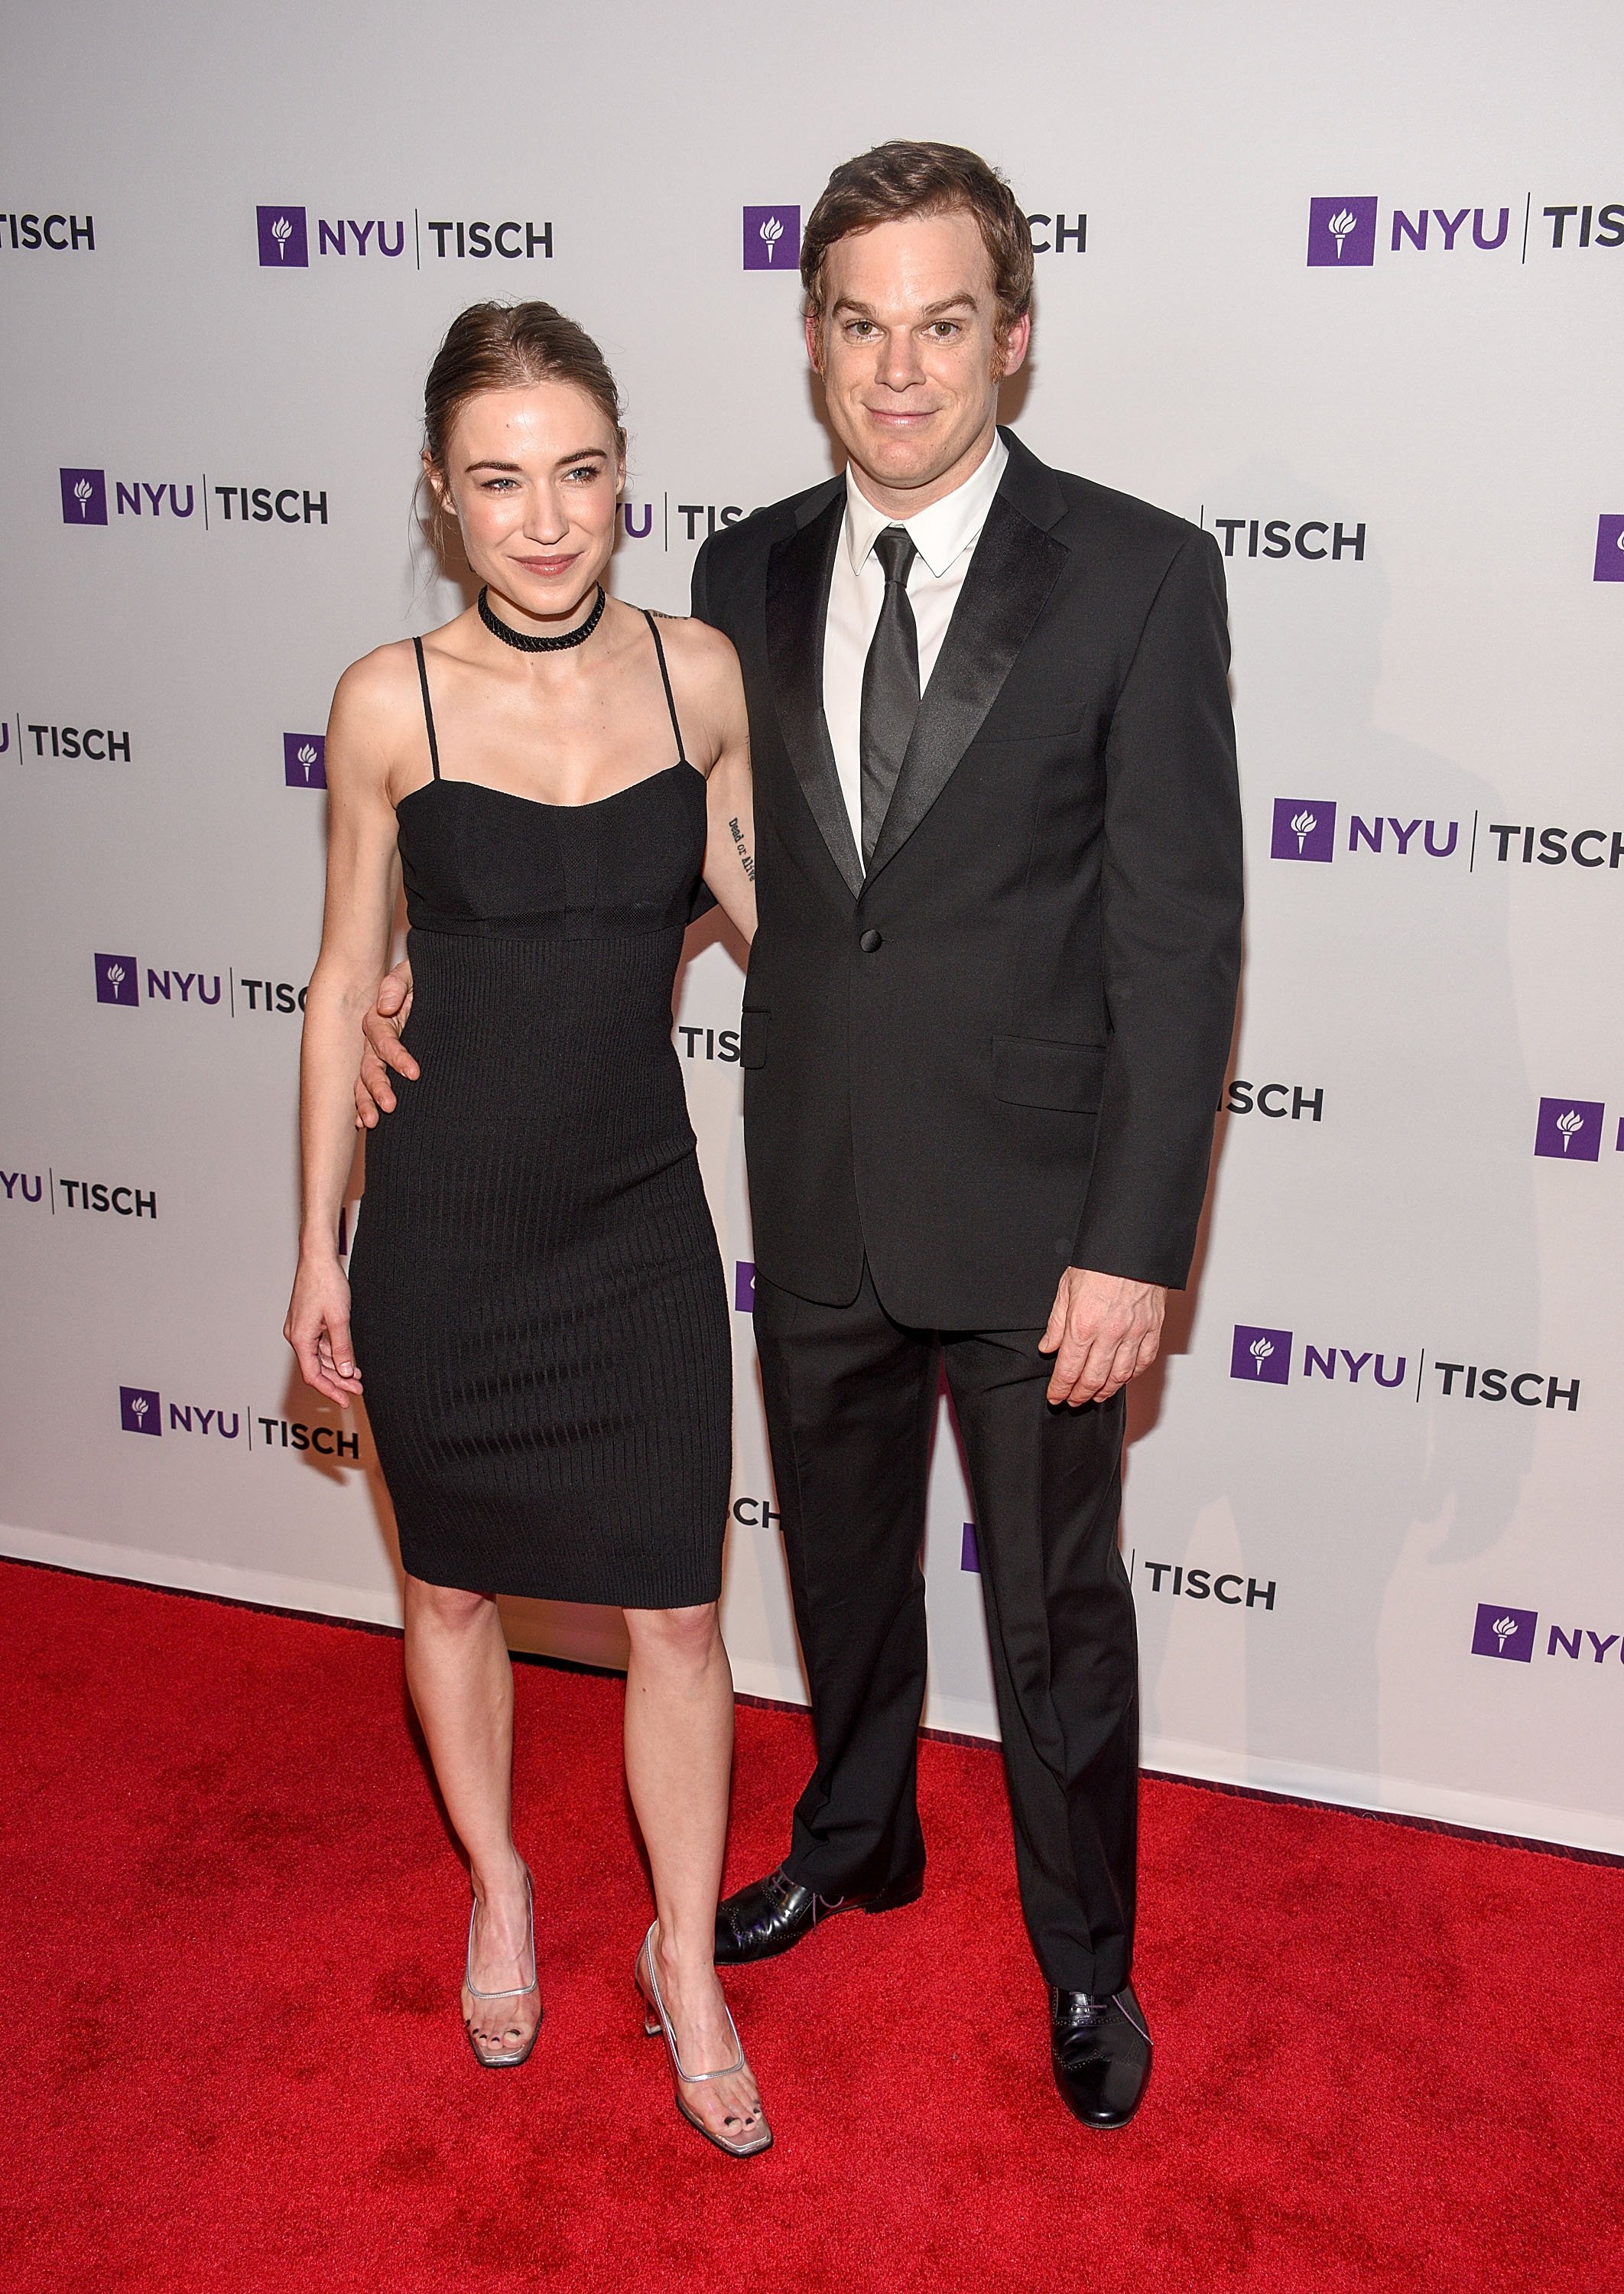 Morgan Macgregor and Michael C. Hall pose on the red carpet at the NYU Tisch School Of The Arts 2015 Gala at Frederick P. Rose Hall on May 4, 2015 in New York City | Source: Getty Images